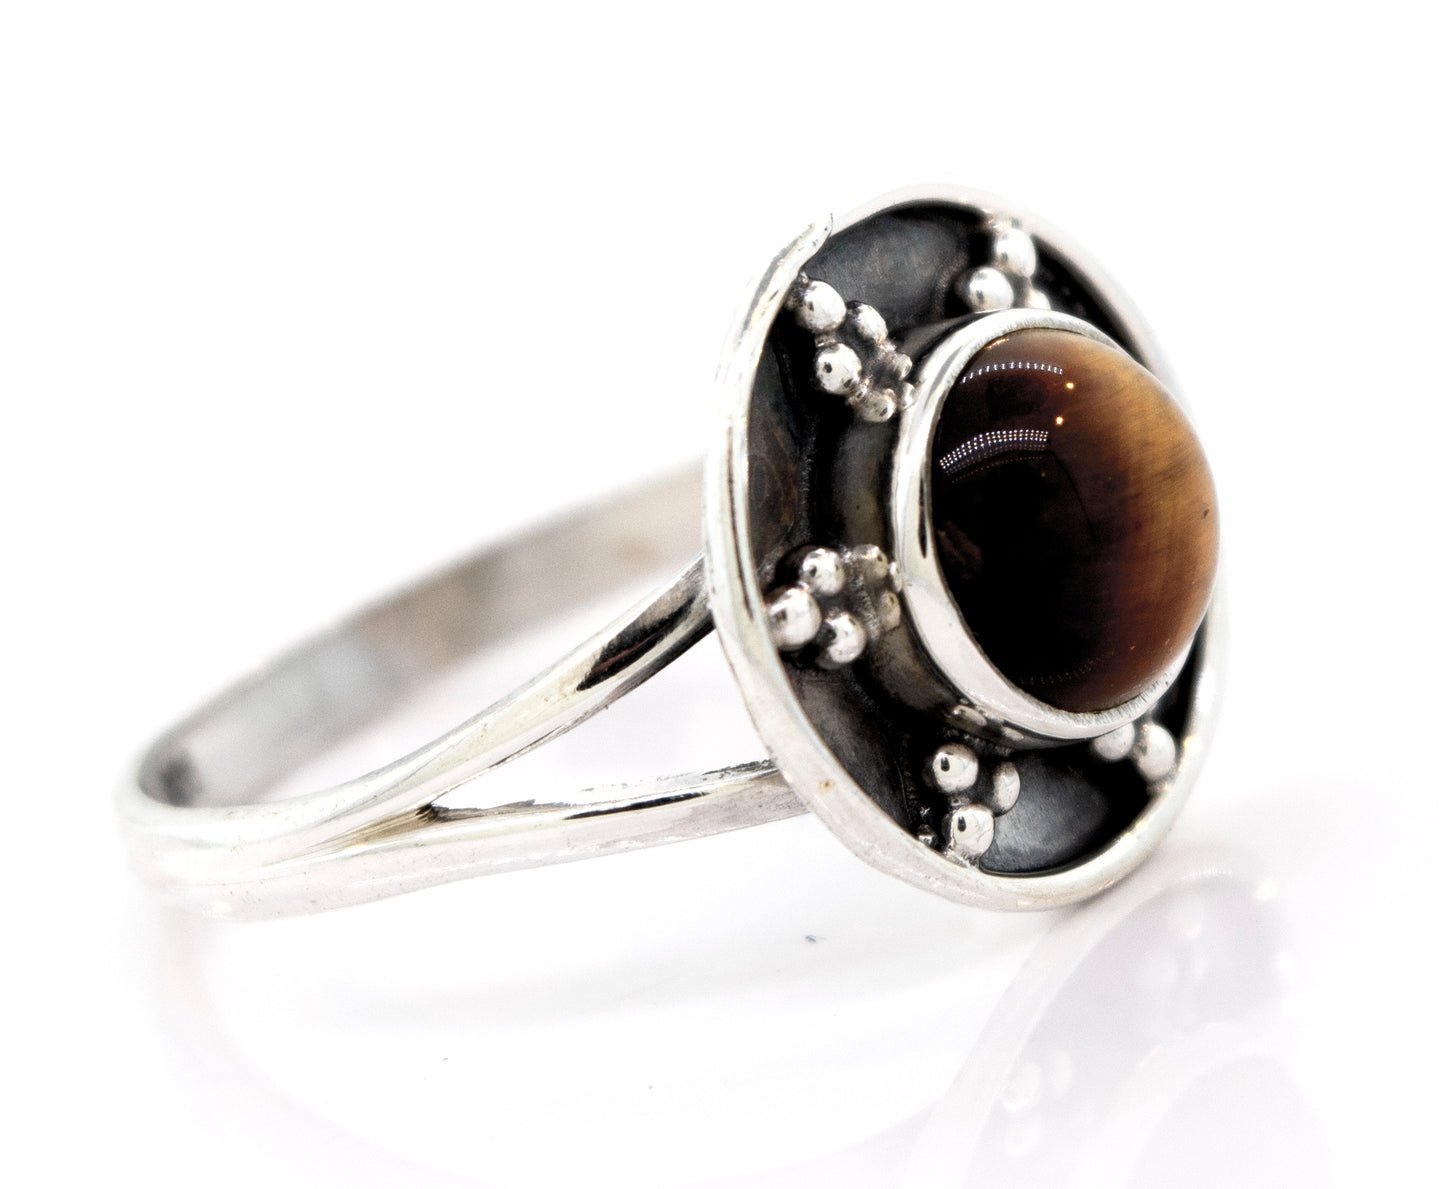 A Super Silver Tiger's Eye Ring With Unique Oxidized Silver Design featuring a mesmerizing tiger's eye stone.